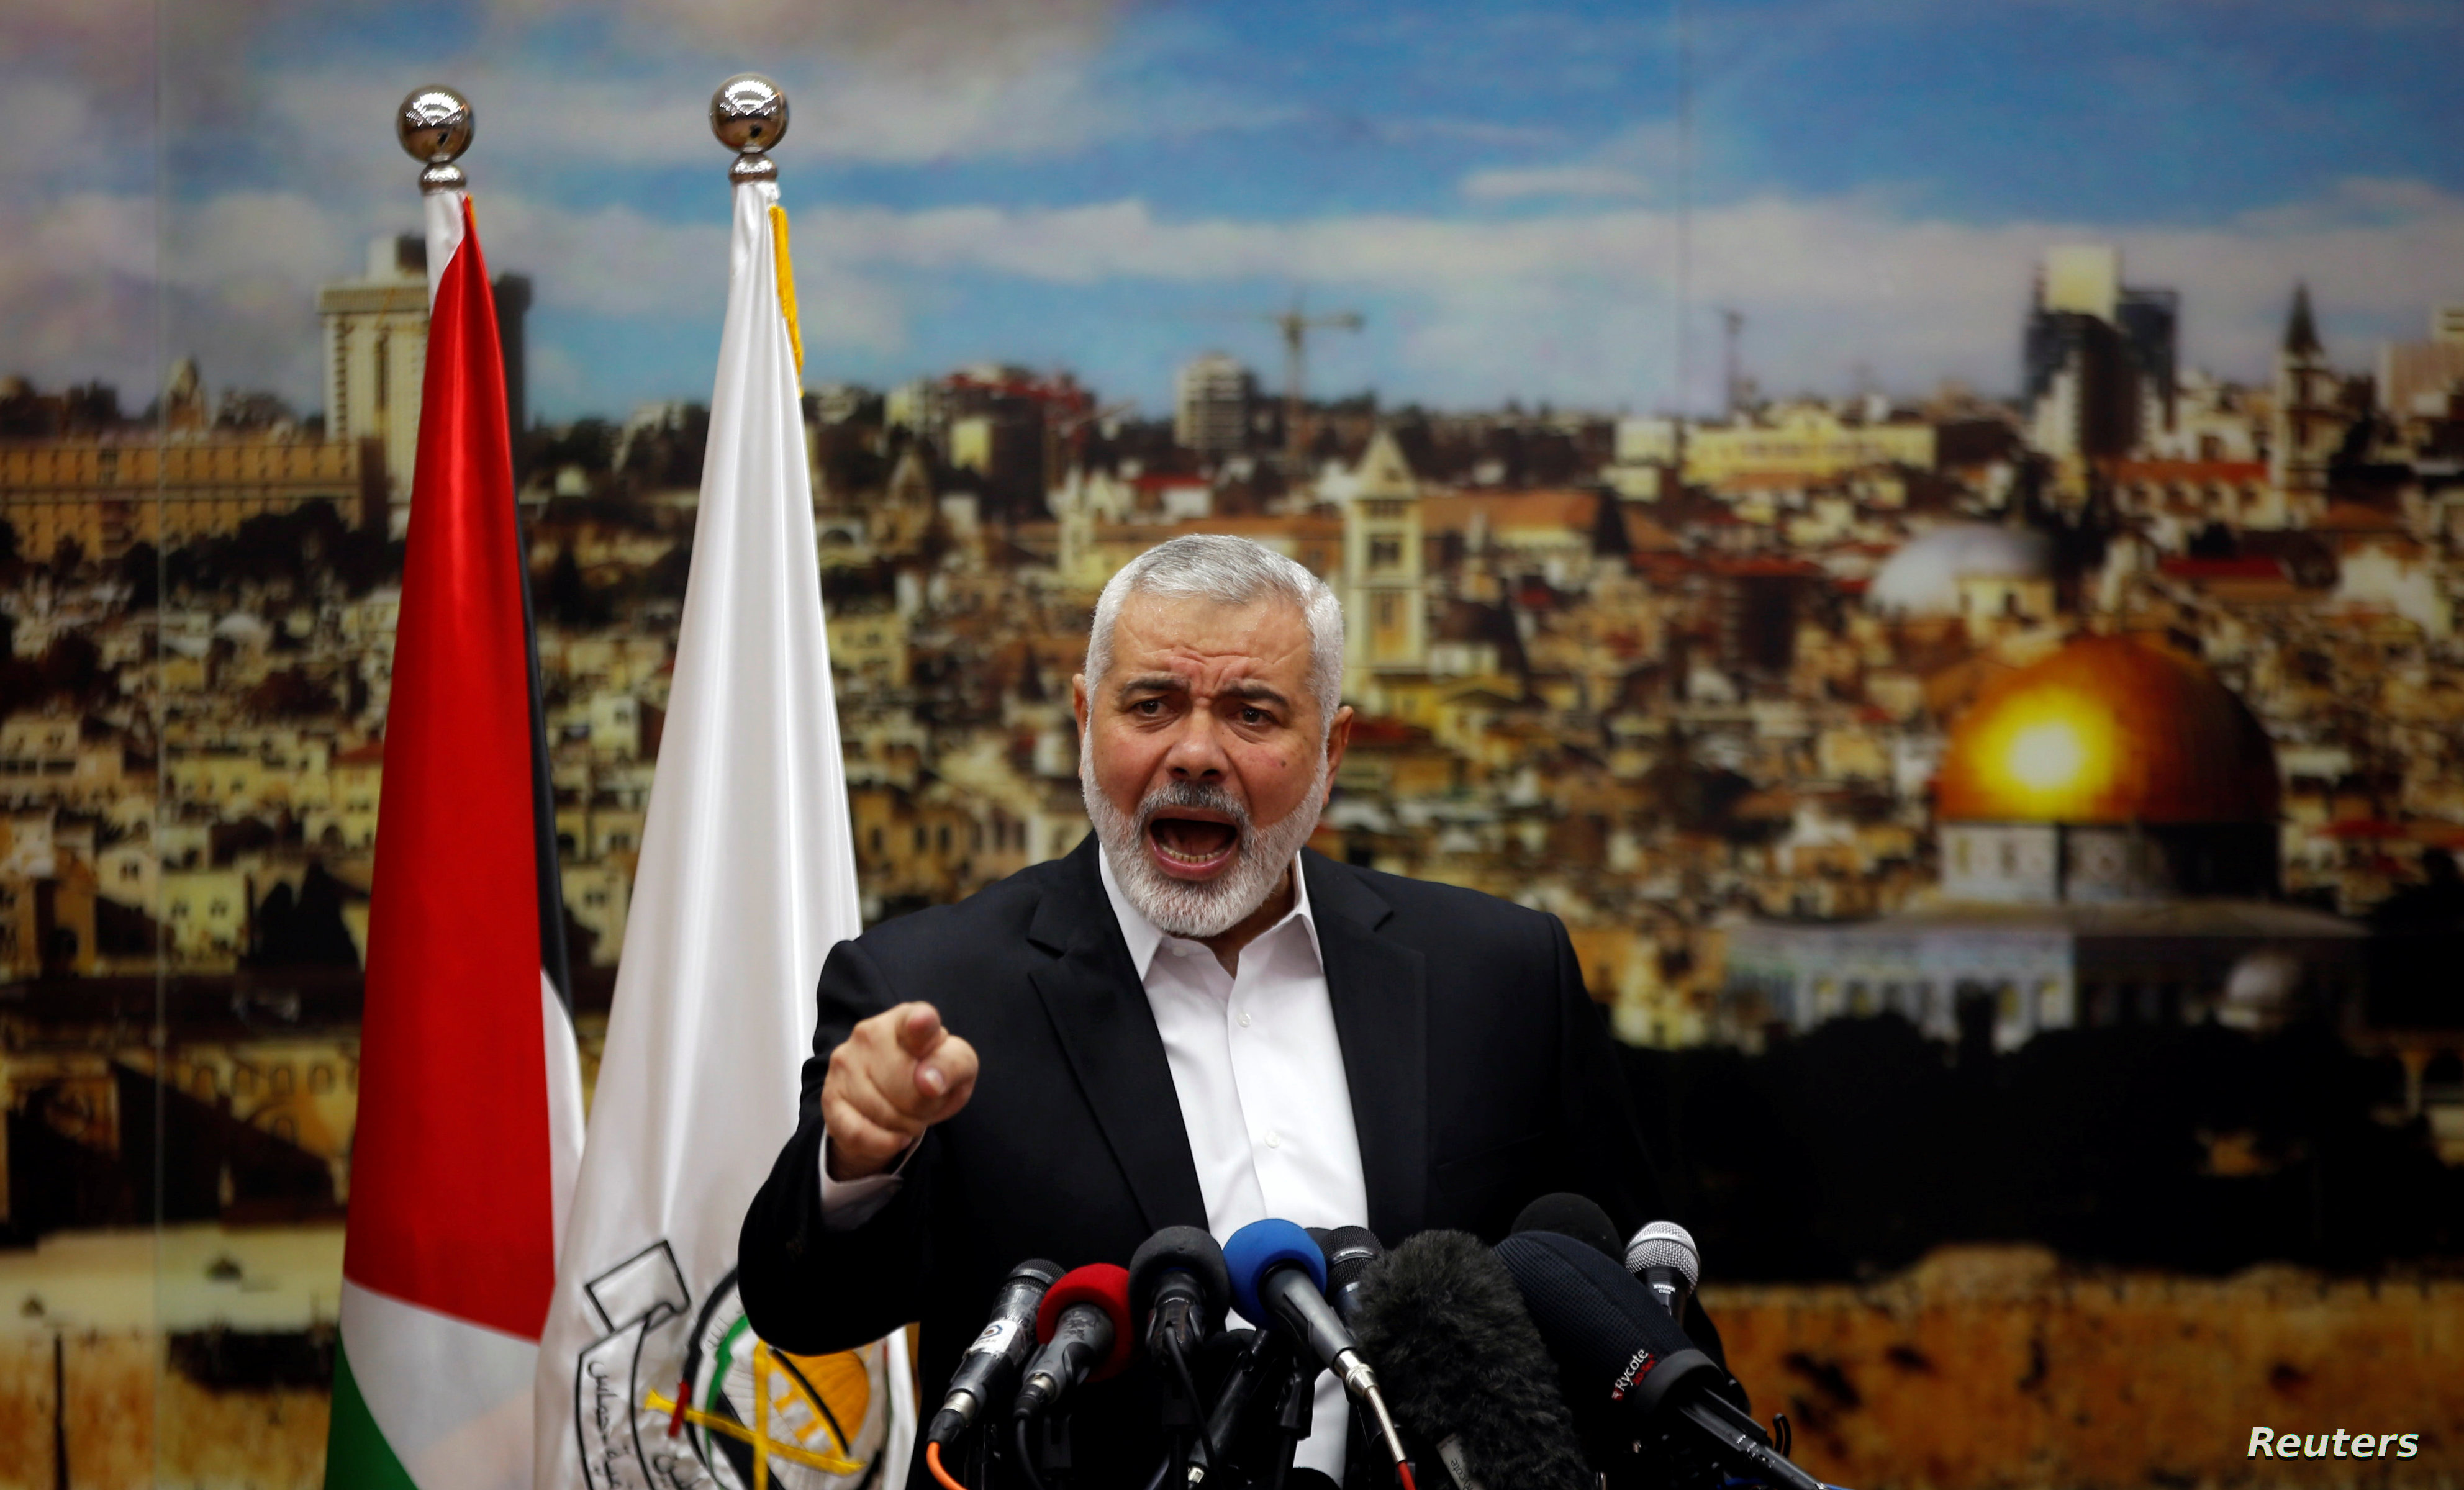 Hamas Chief Ismail Haniyeh gestures as he delivers a speech over US President Donald Trump's decision to recognize Jerusalem as the capital of Israel, in Gaza City